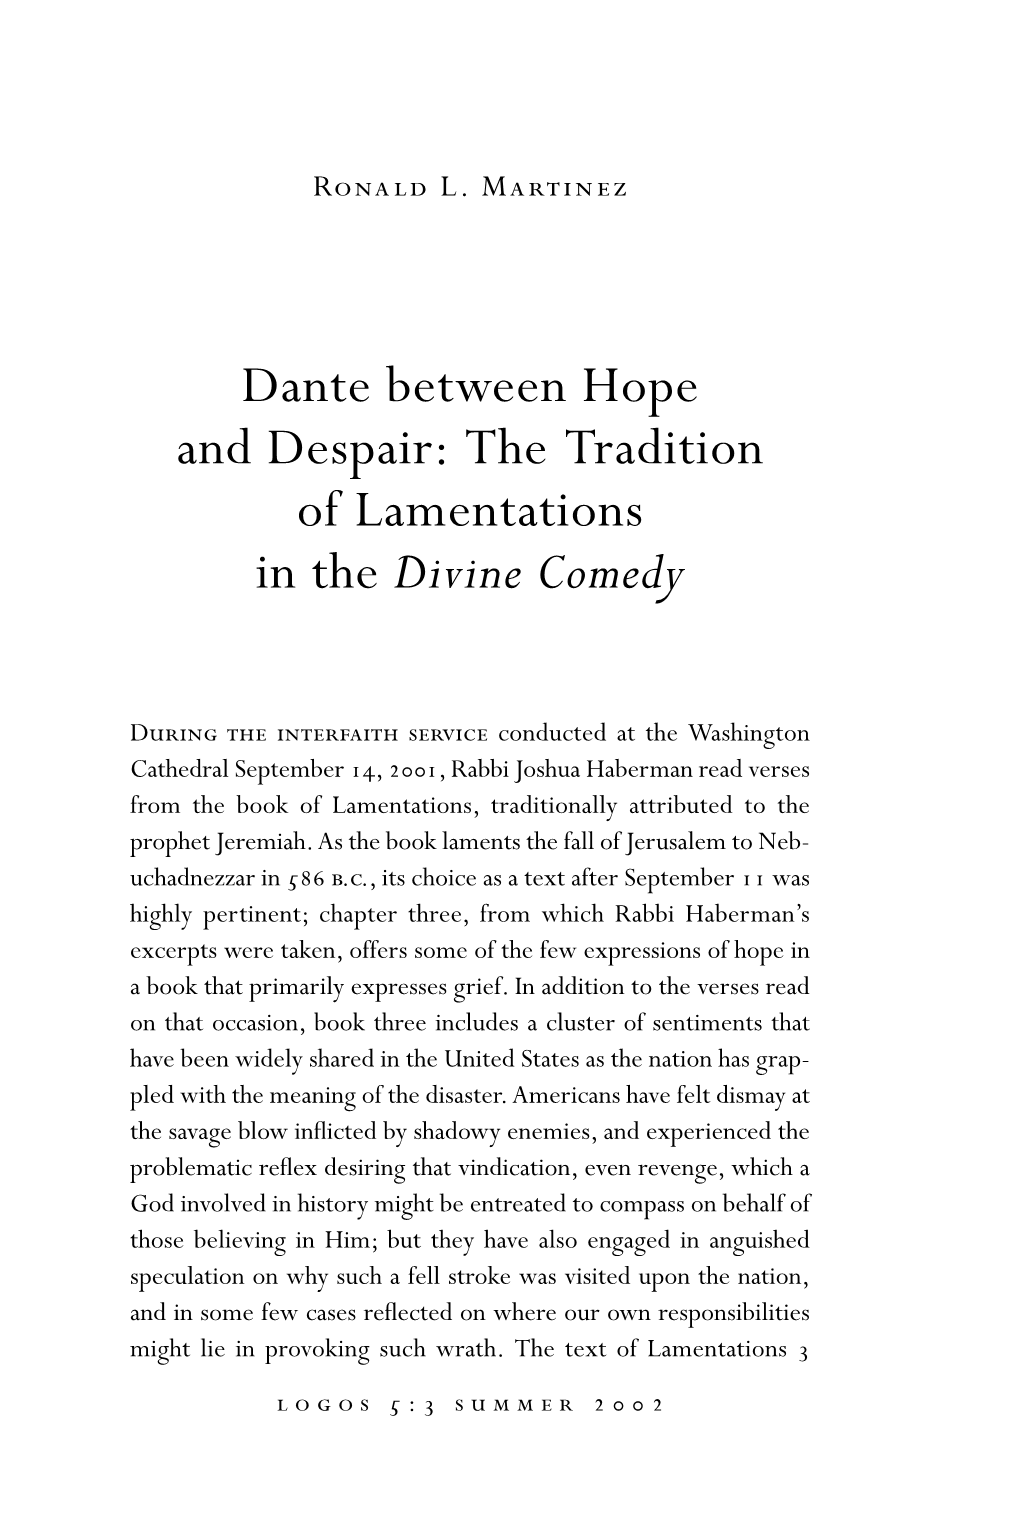 Dante Between Hope and Despair: the Tradition of Lamentations in the Divine Comedy